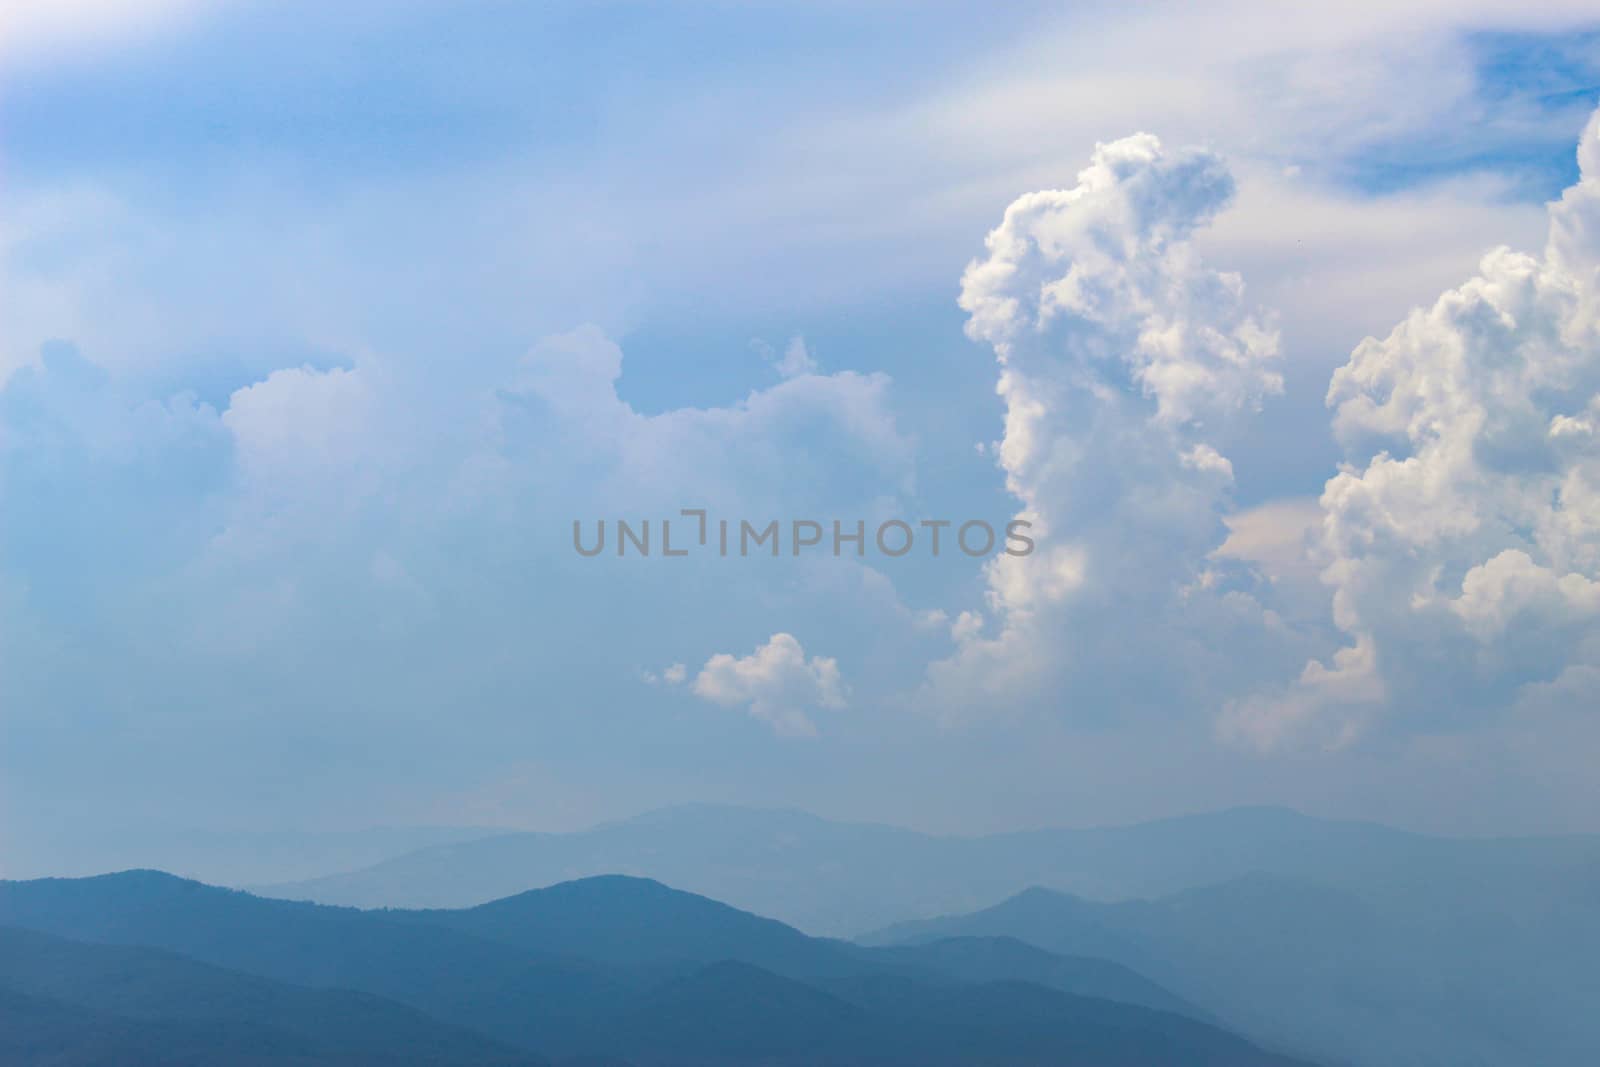 Mountains and hills in the distance. Blue silhouette of a mountain in the distance, with clouds in the blue sky. by mahirrov